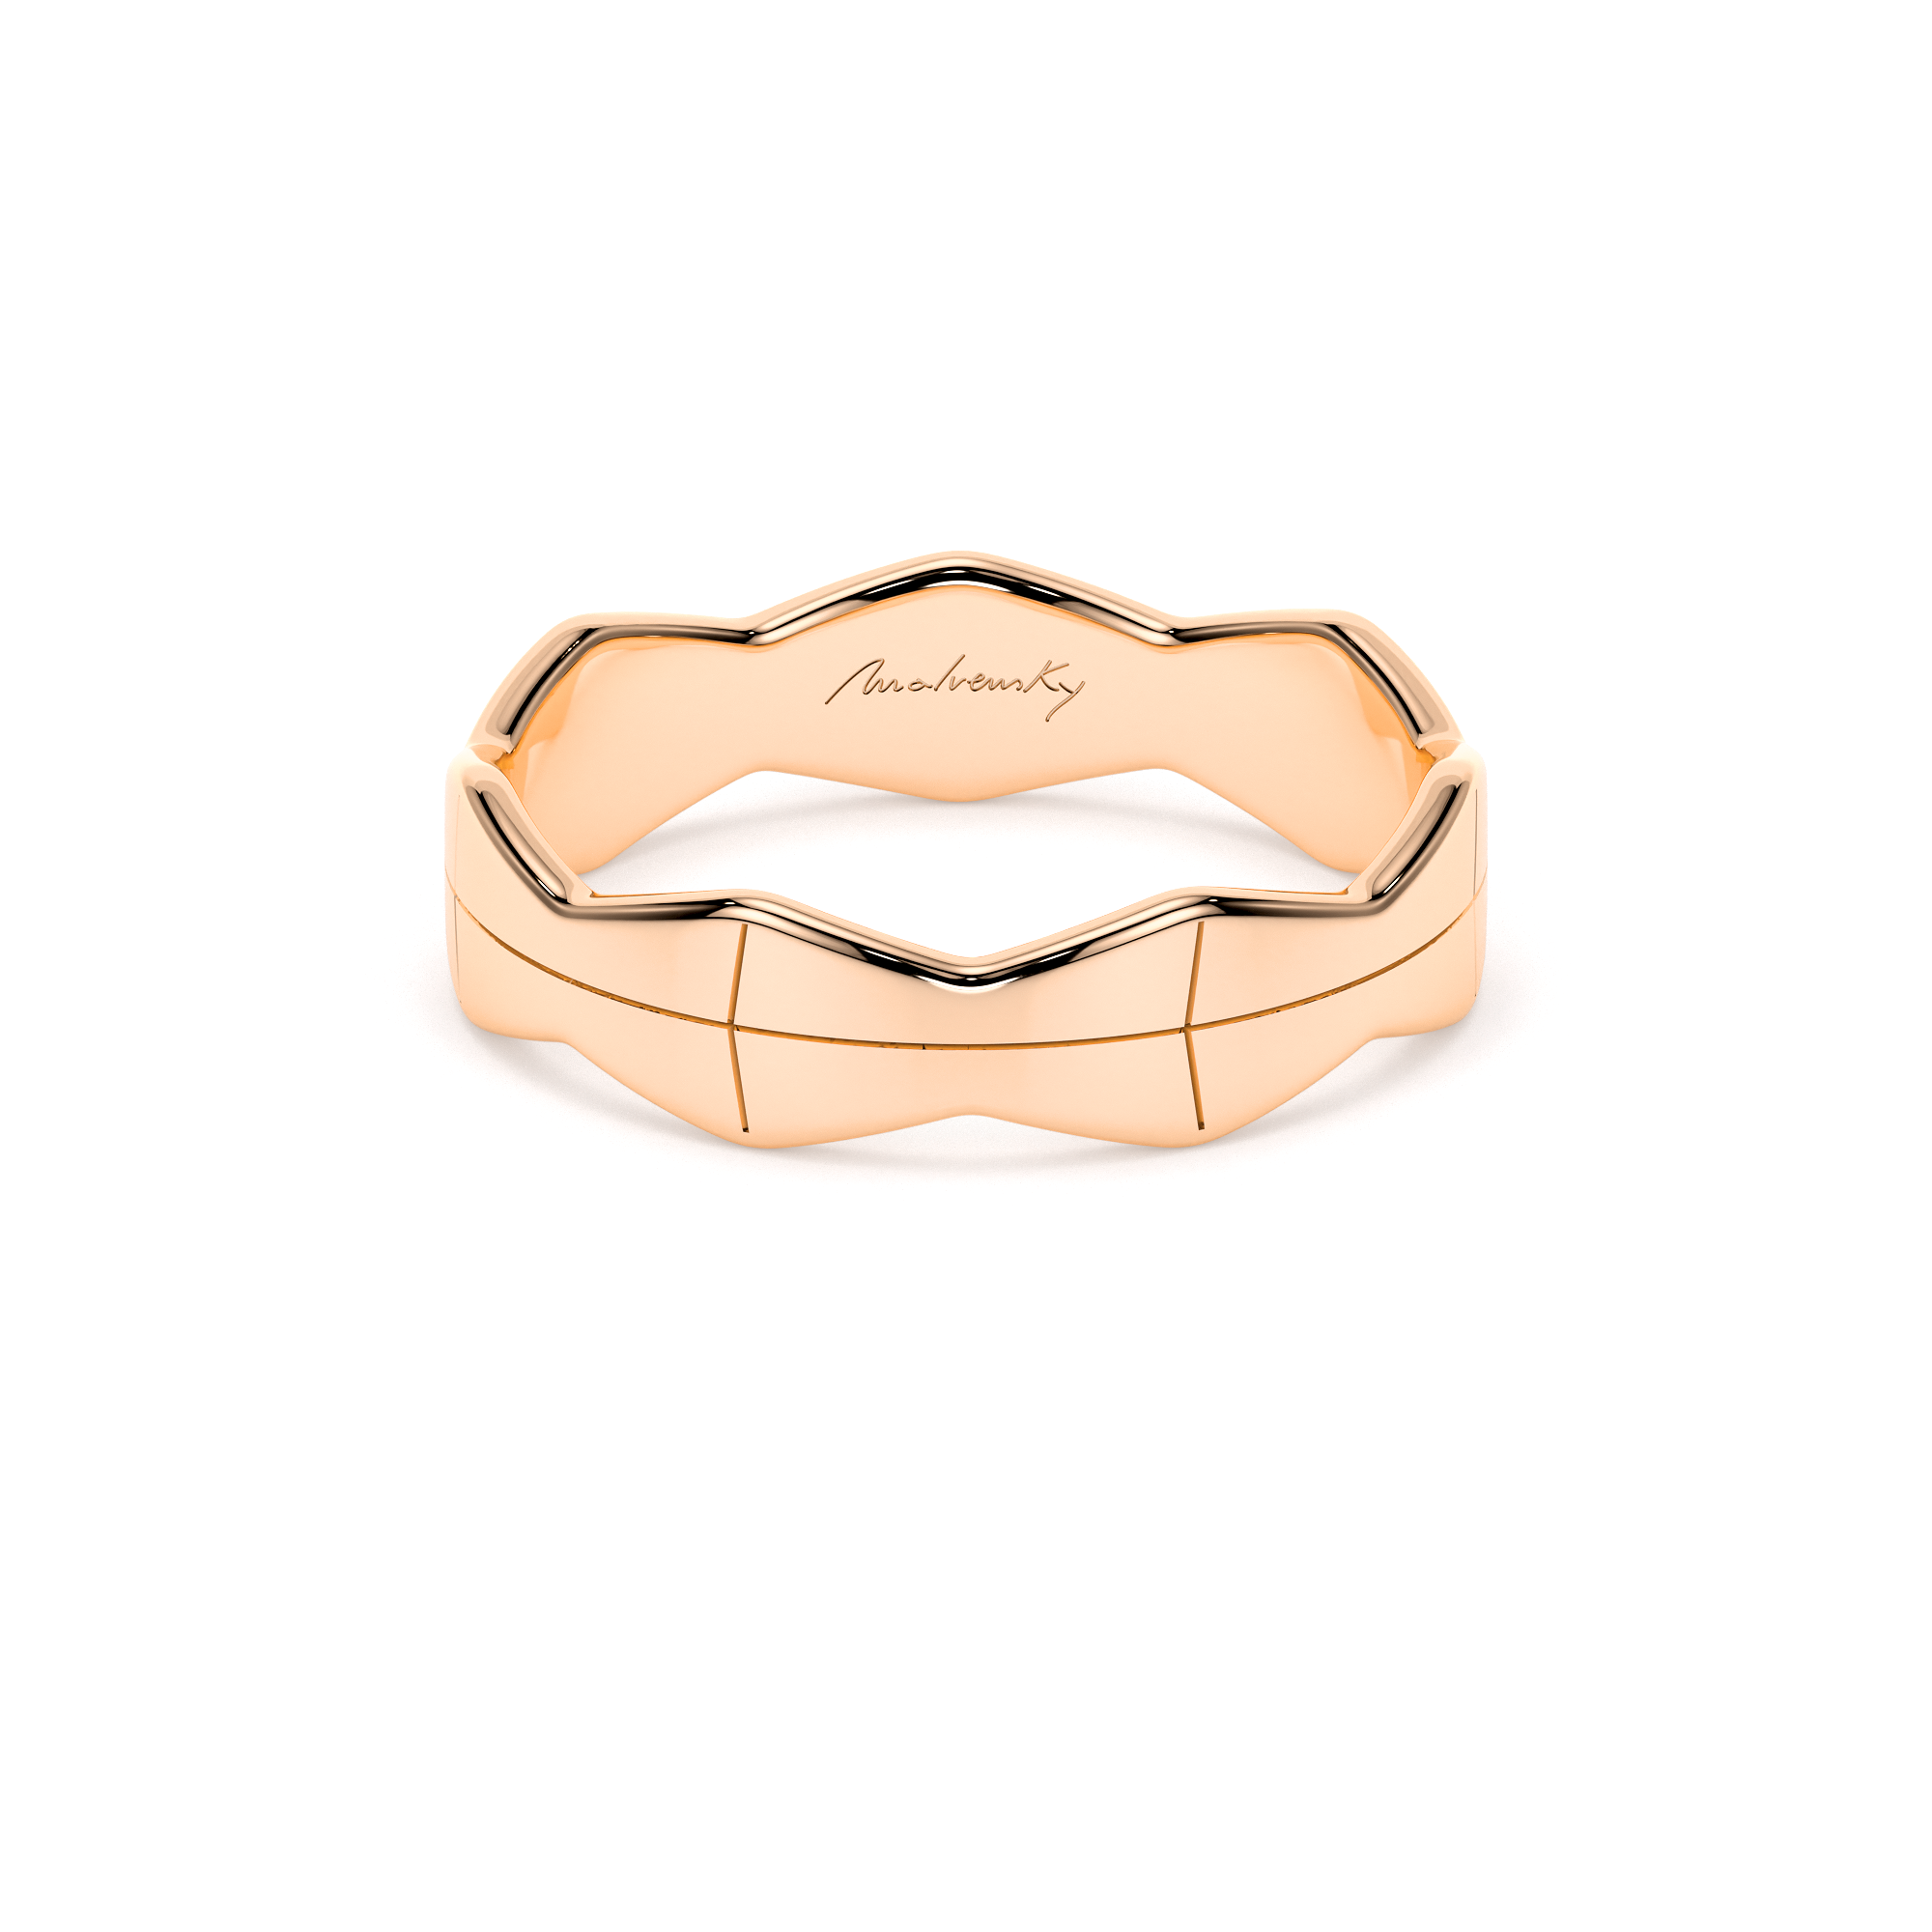 14 k Infinity wide wedding band in rose gold